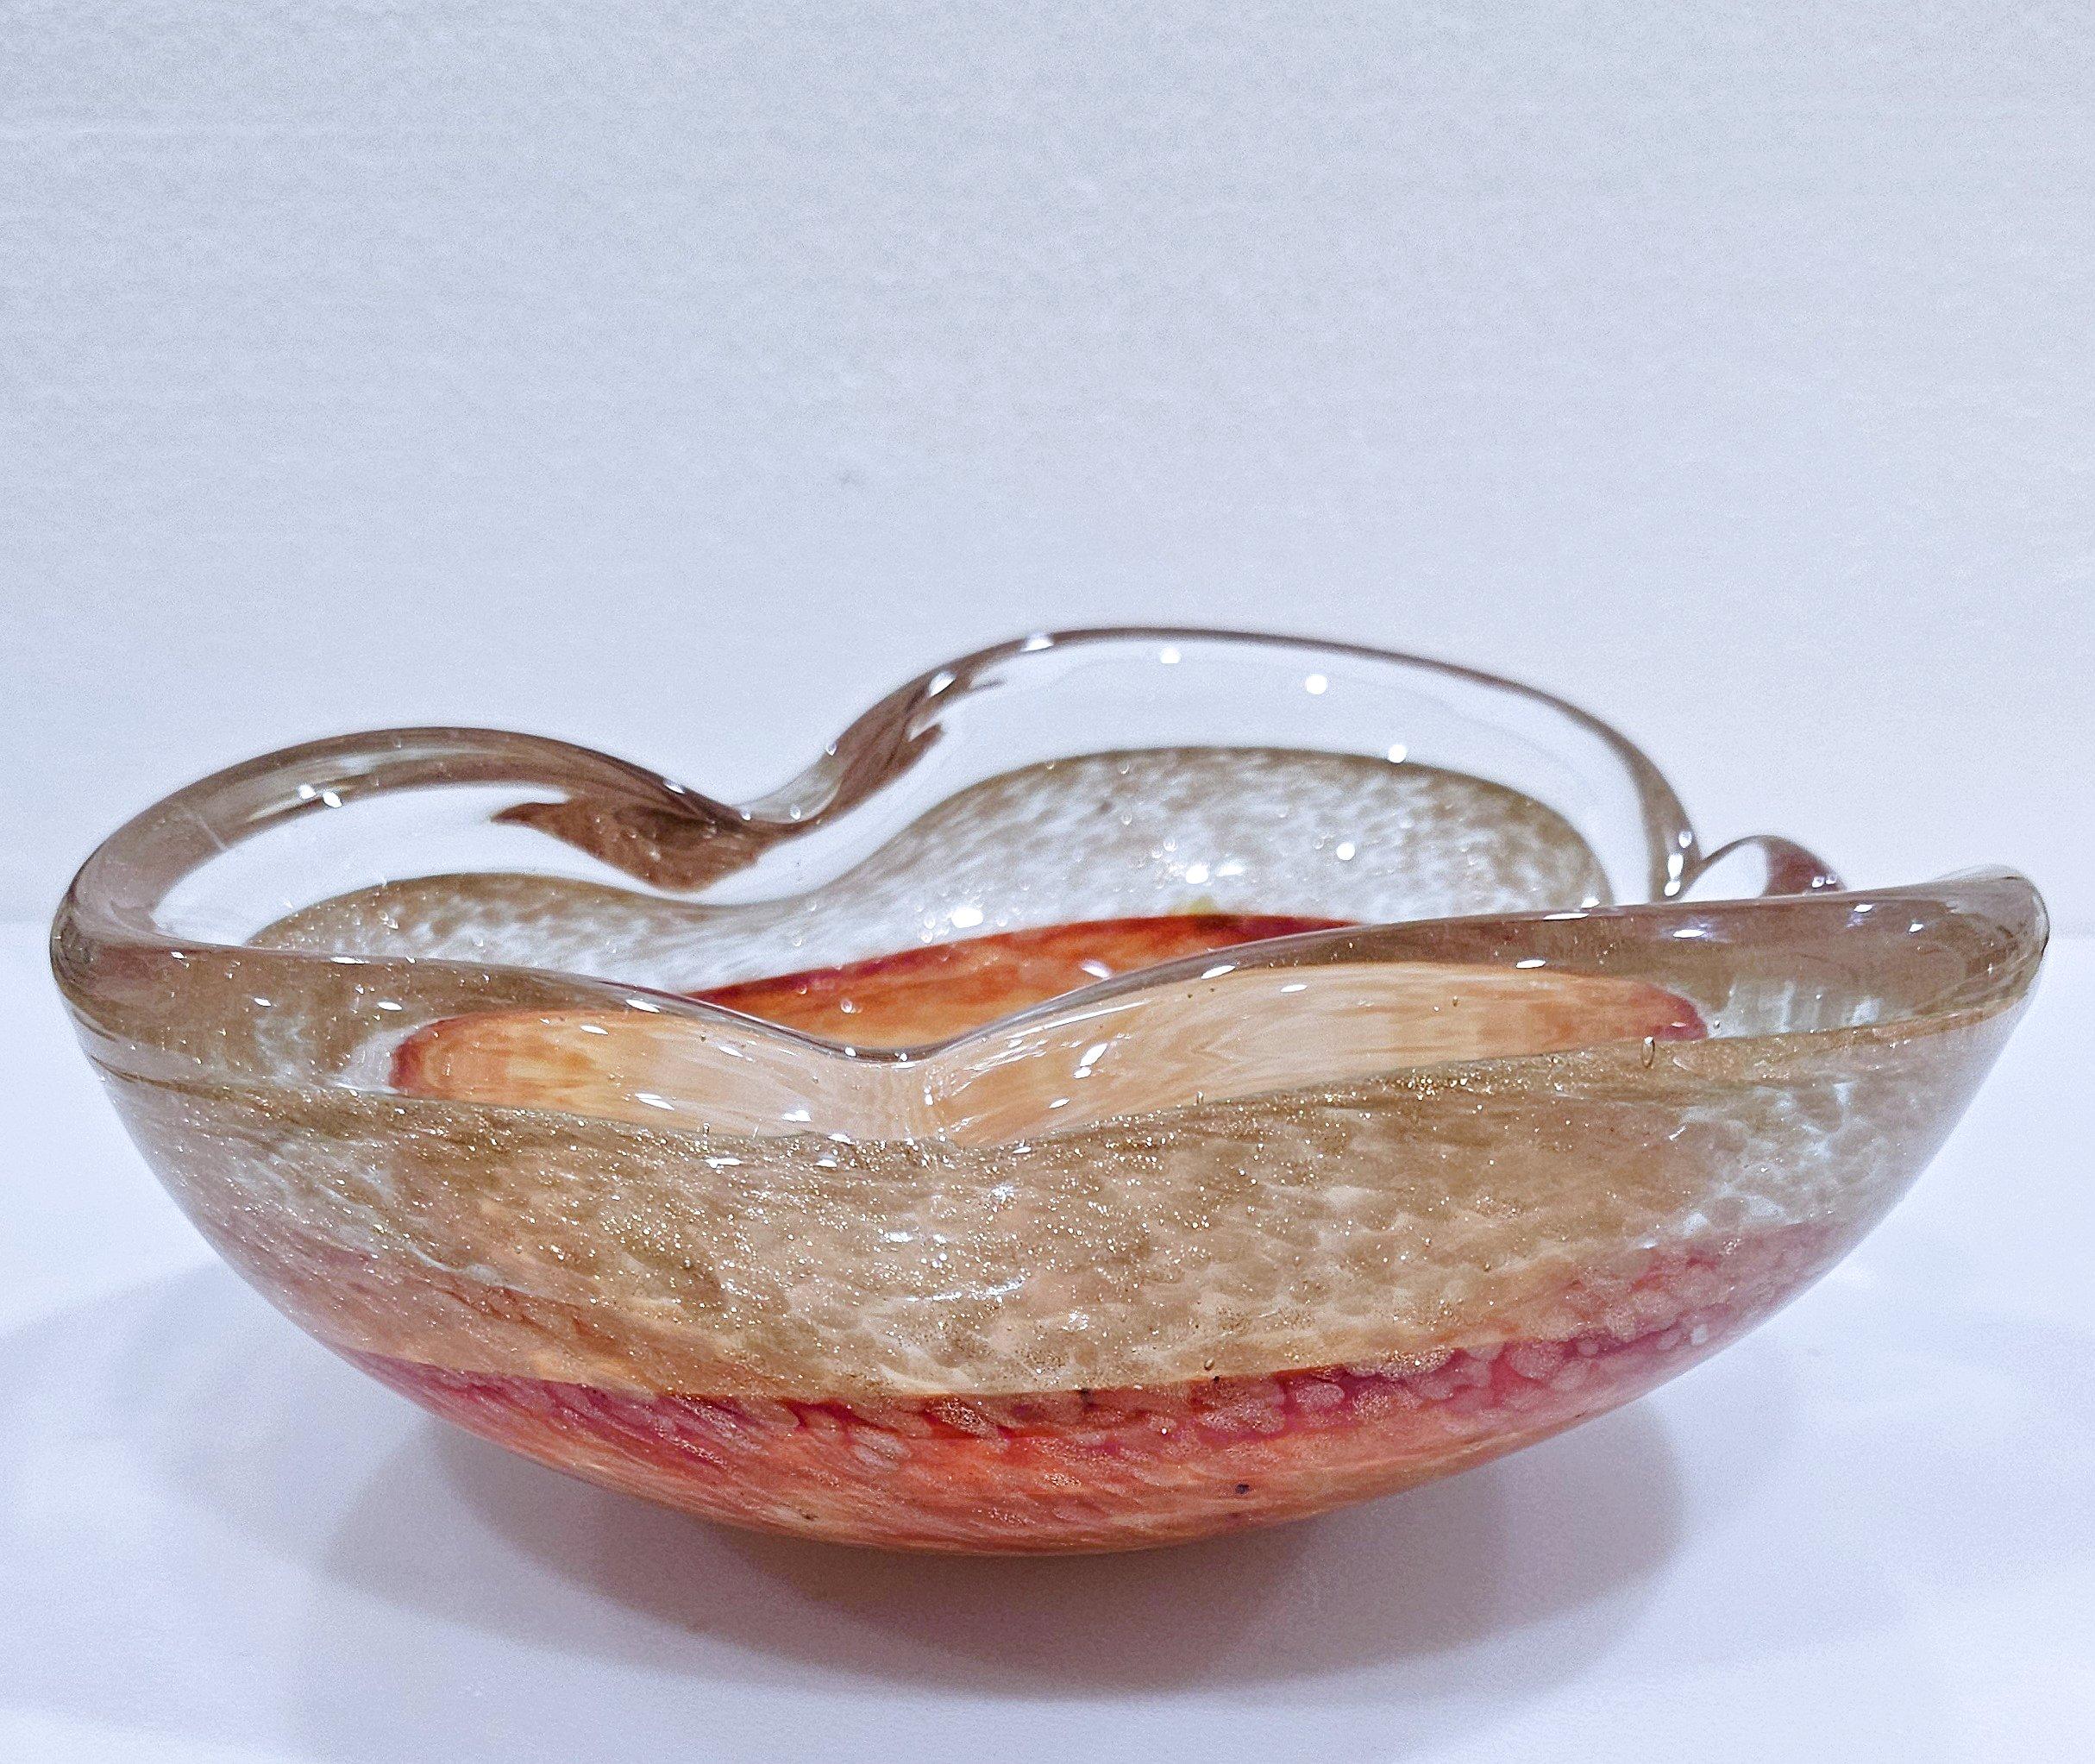 Vintage Murano Glass Dish / Bowl with Gold Fleck
A lovely work of Murano glass artistry in good vintage condition.
7.5 x 7 x 3 inches (apx)
Please note that the colors seem to look notably brighter/more saturated in the photos here than in person,